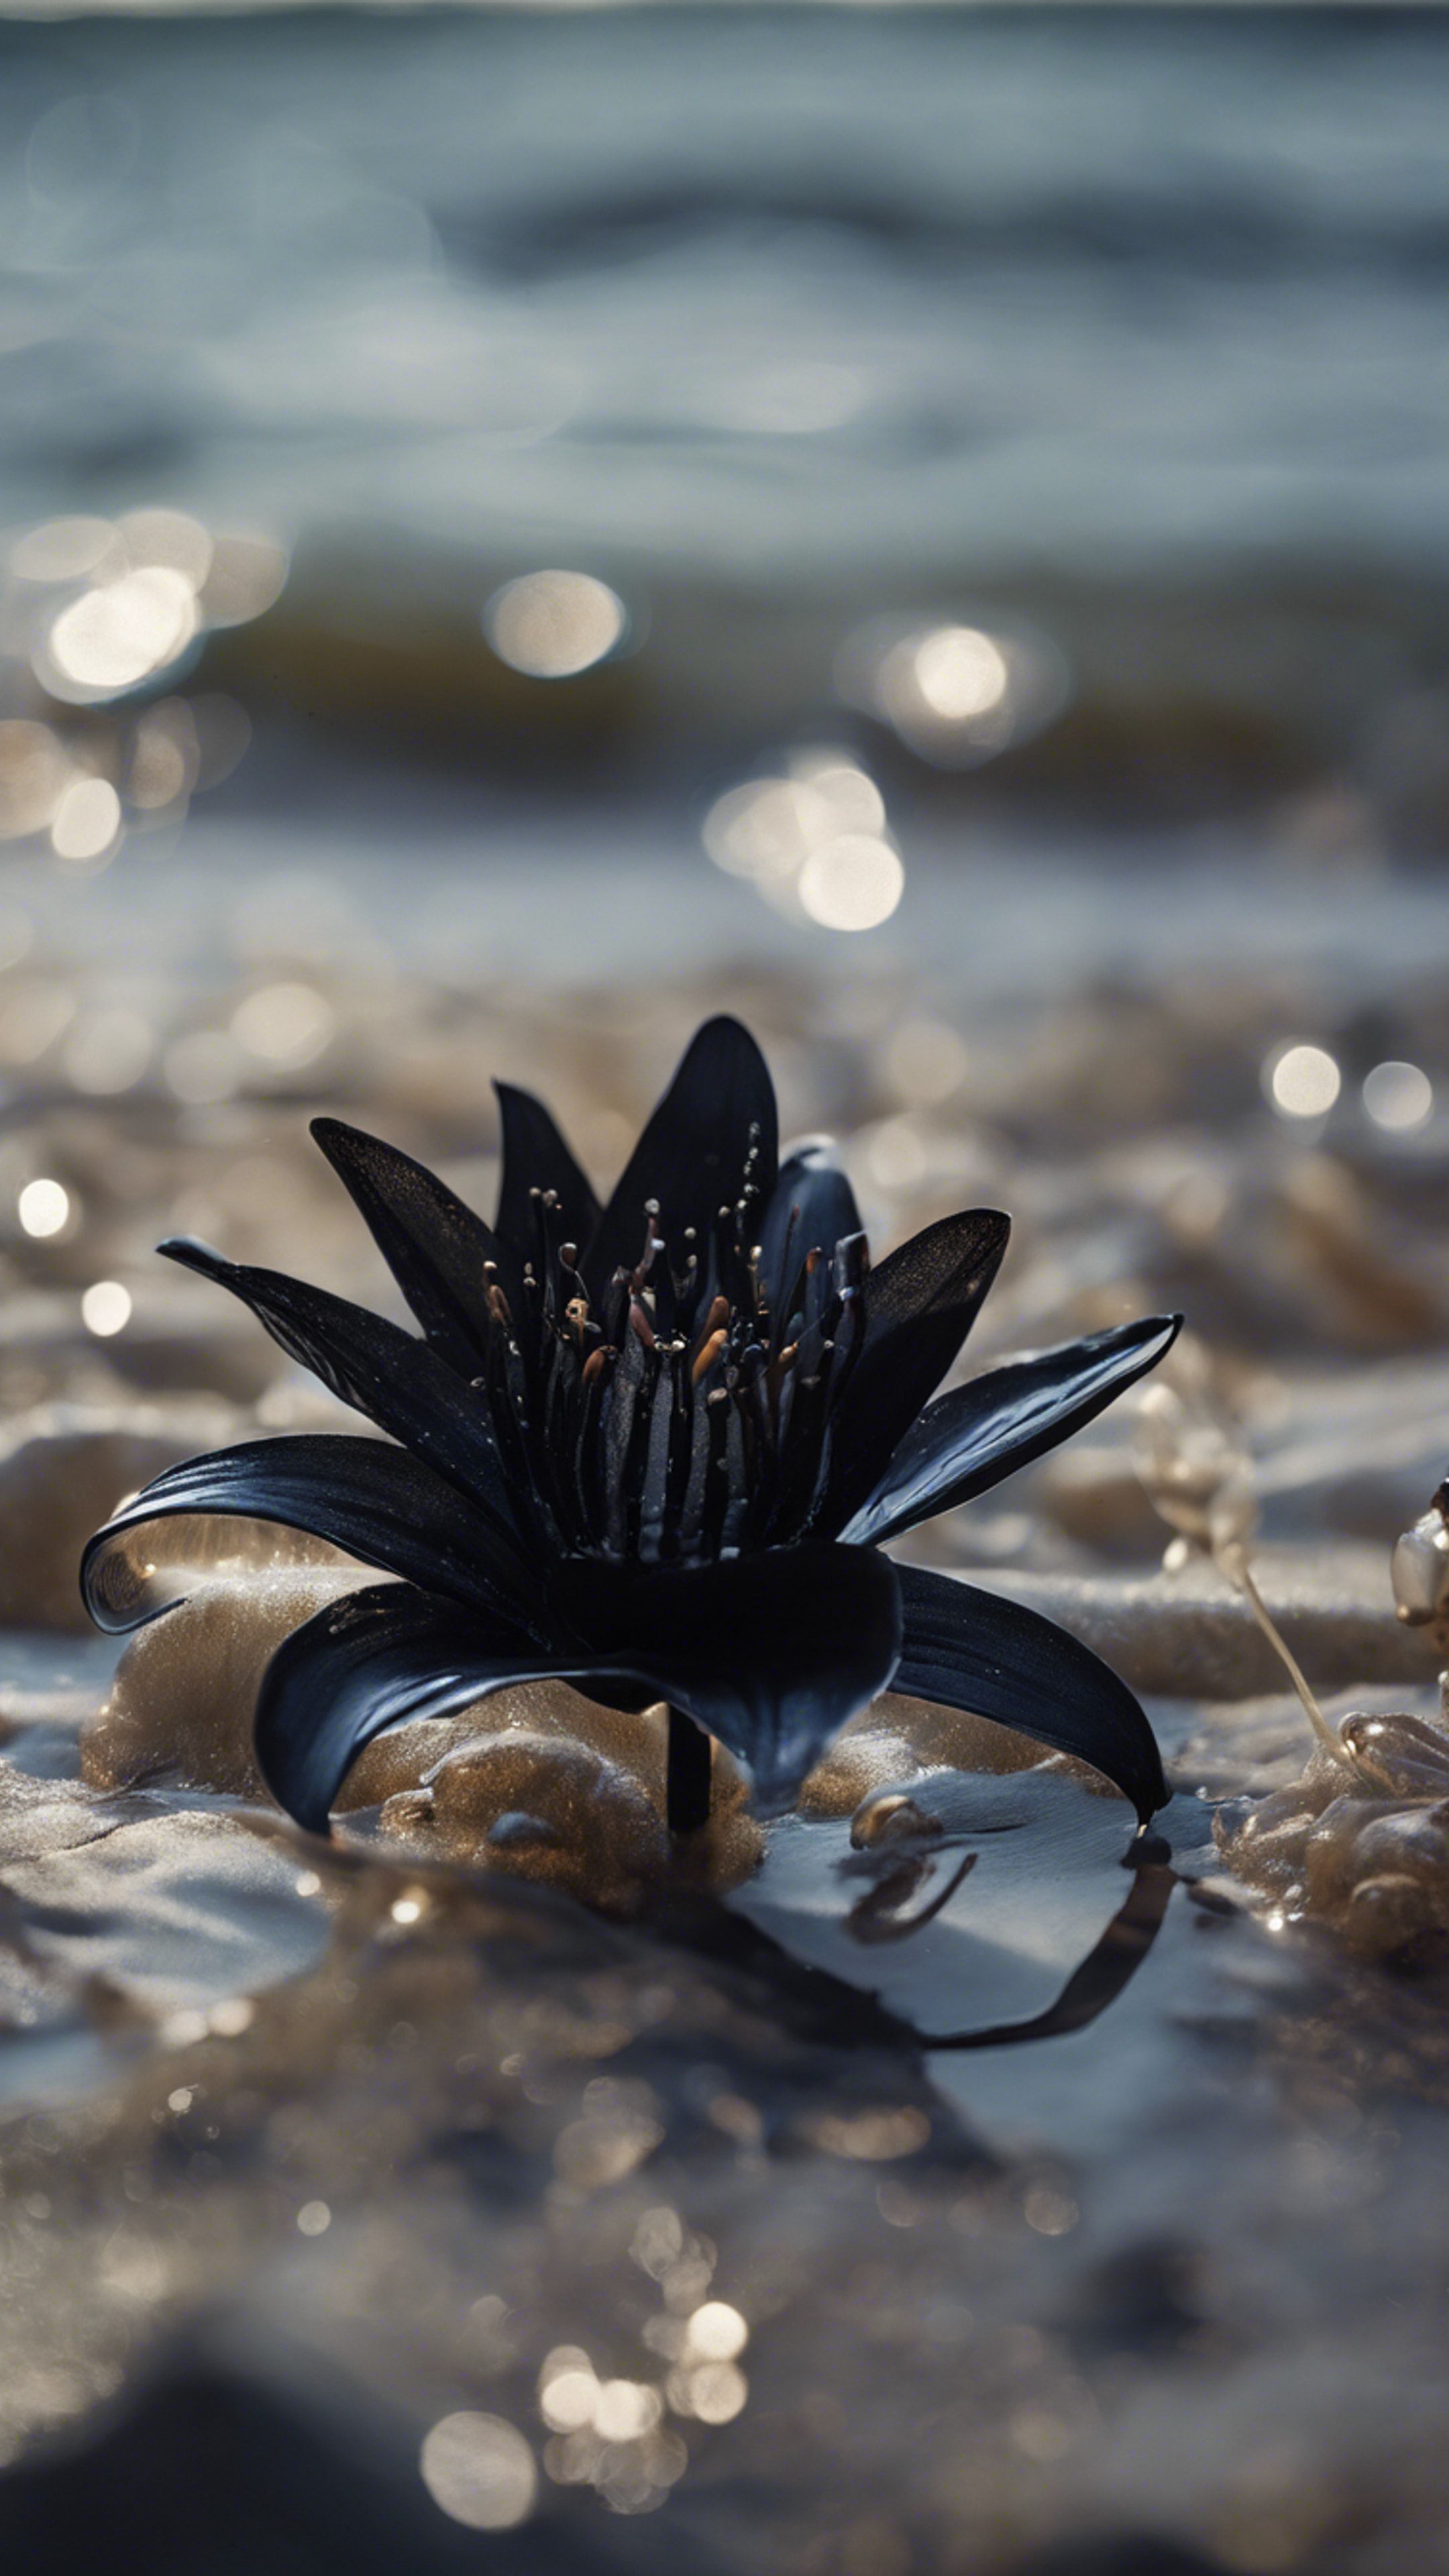 A black lily hiding under the tide, revealed only when the ocean pulls away, revealing the dark secrets of the sea bed. Tapéta[3833c30c18c941348380]